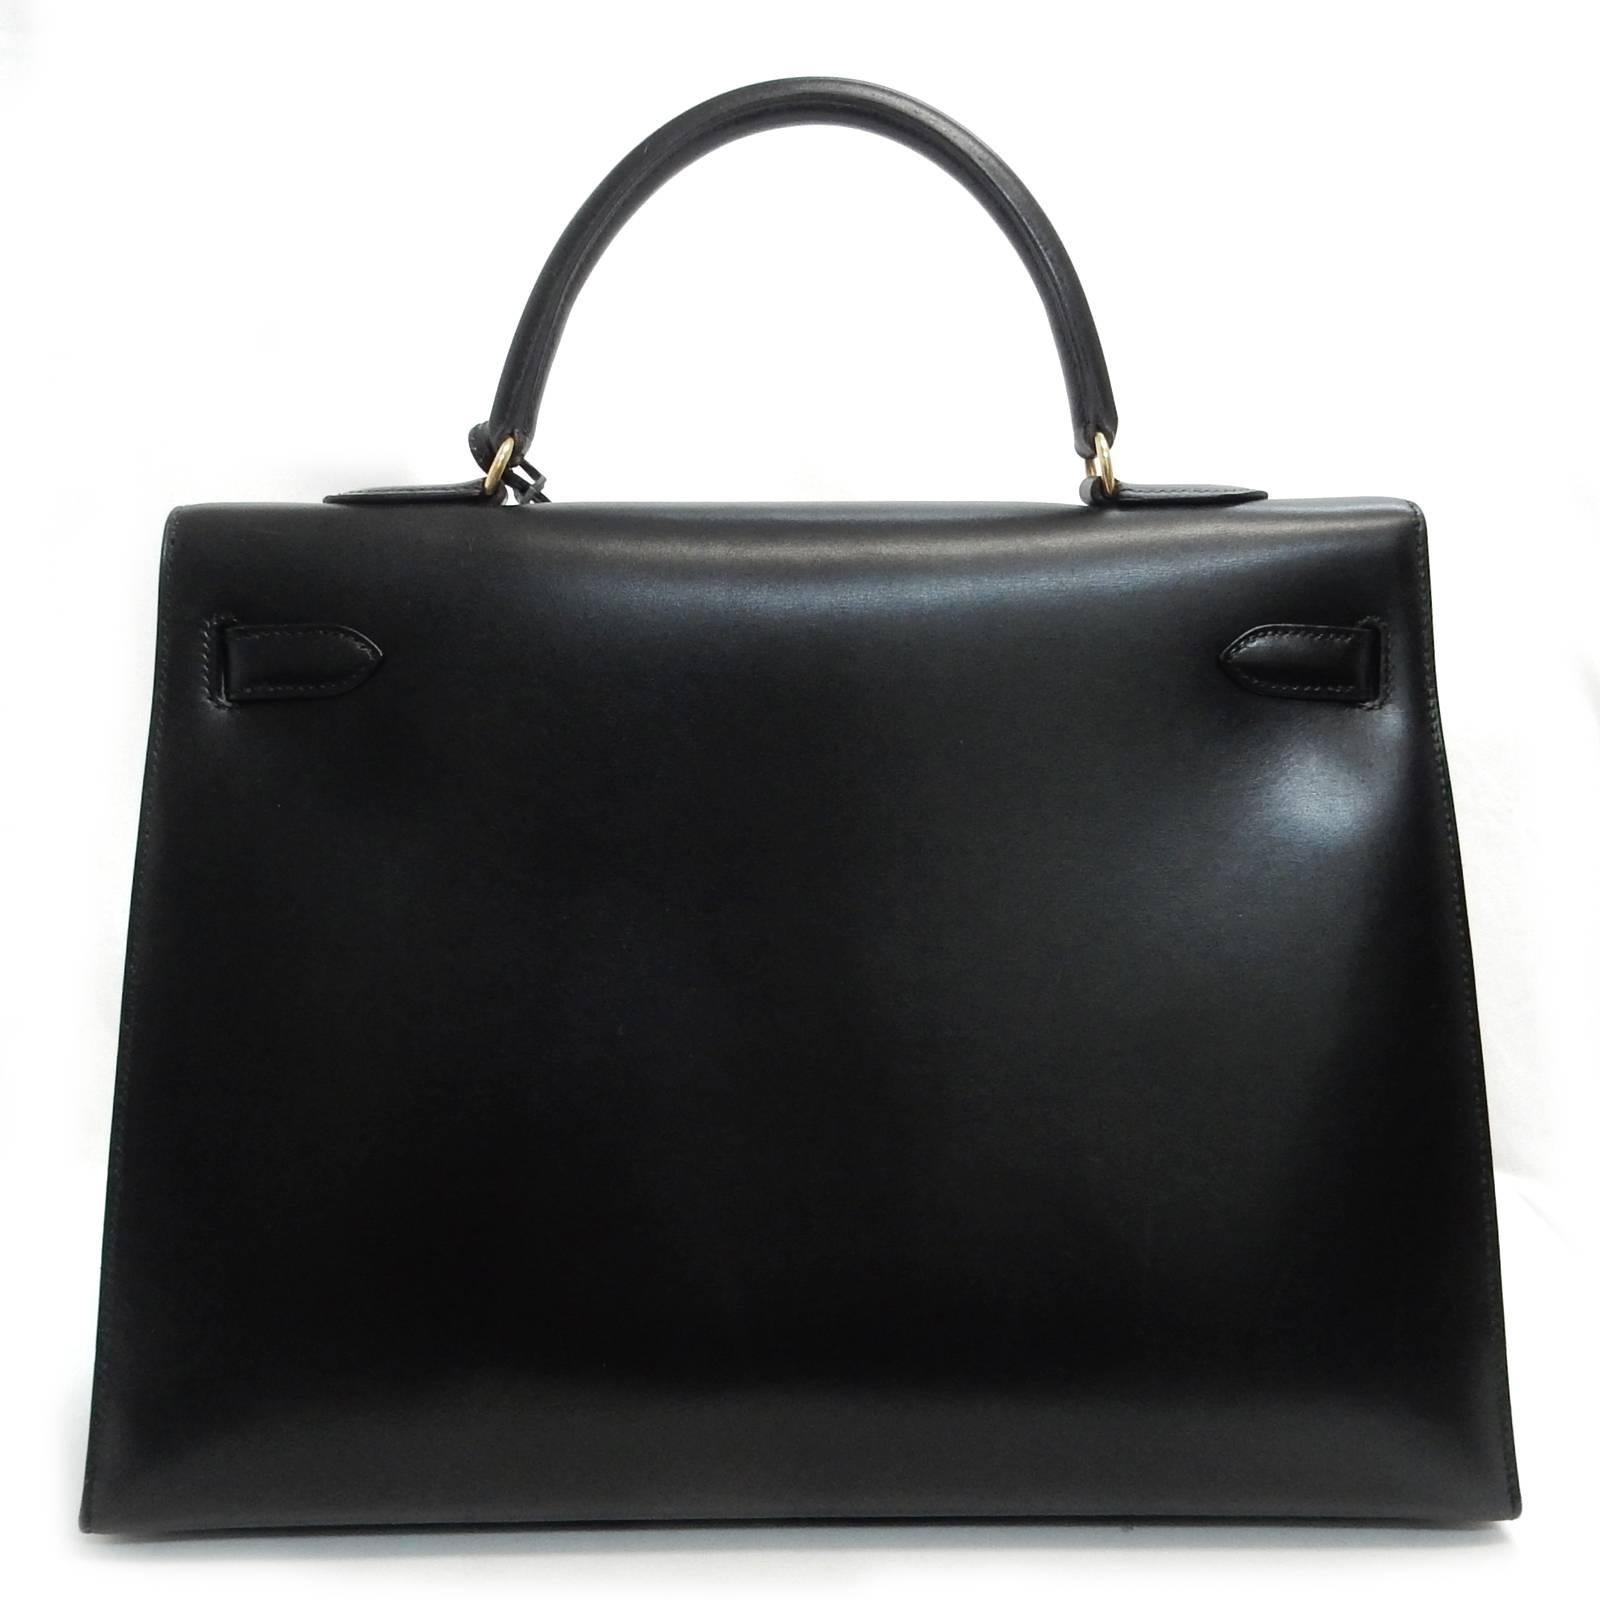 - Hermes Kelly 35 black box calfskin leather satchel bag with no strap. 

- Height: 9 inches. Lenght: 14 inches. Width: 5.5 inches. Strap Drop: 3.5 inches. 

- Height: 23cm. Length: 35cm. Width: 14cm. Strap Drop: 9cm. 

- Code:25Z (made in 1996).